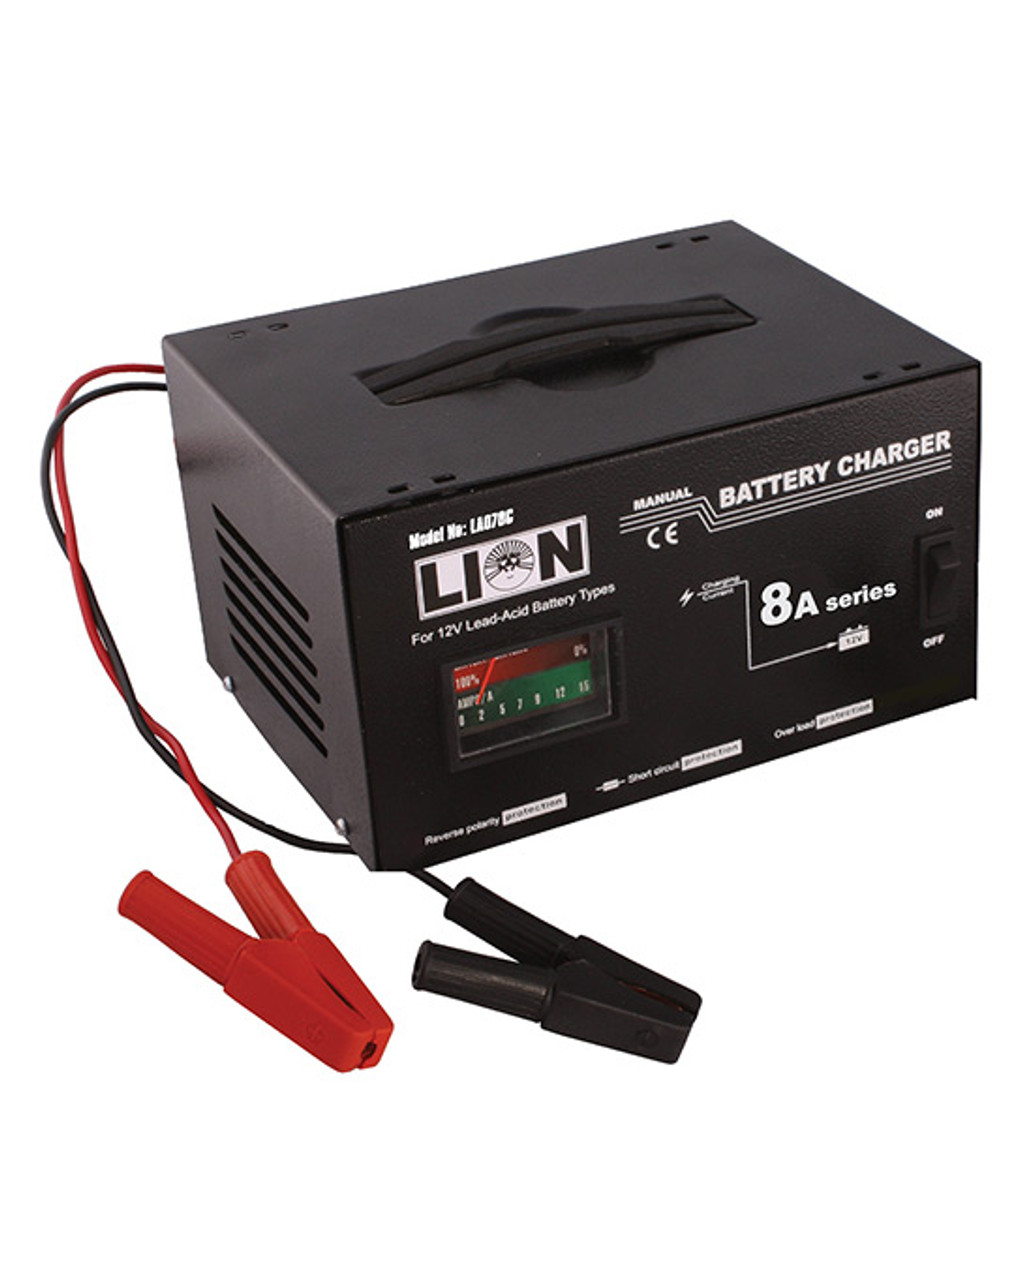 Lion battery. Lion Battery Charger. Green Lion зарядка авто. Lion Battery 18в. Lion Battery Charger tns30w168100.